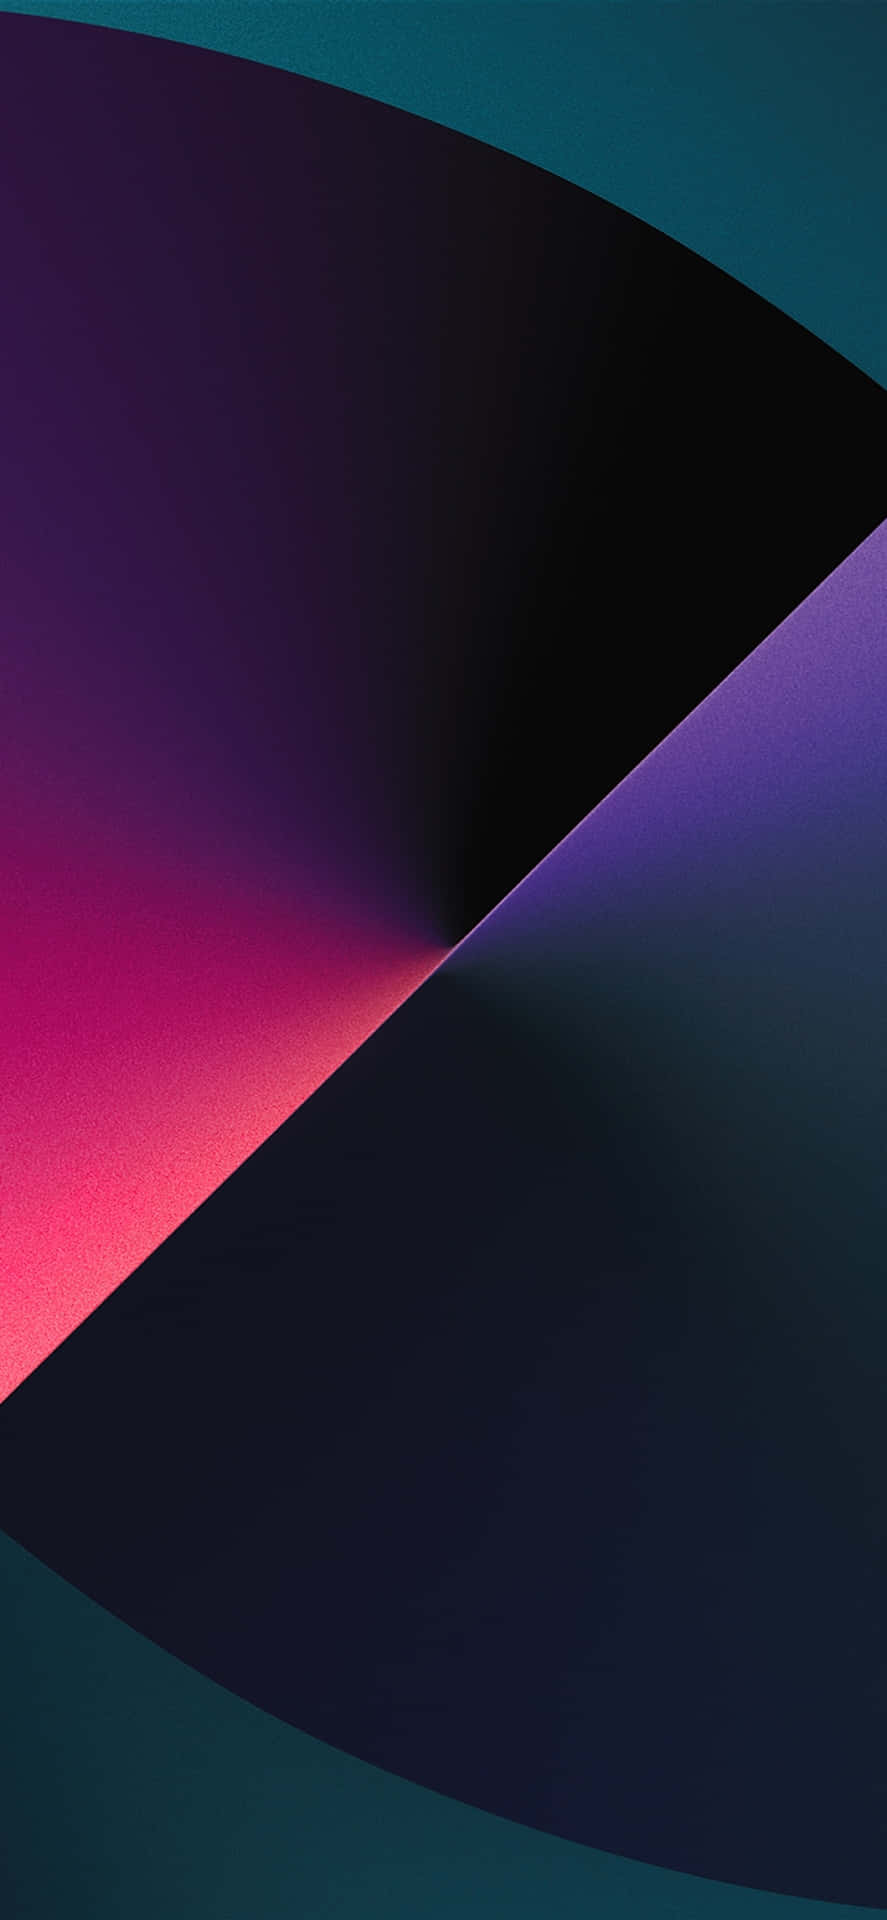 Download Iphones Xs Max Abstract Violet Shade Wallpaper 